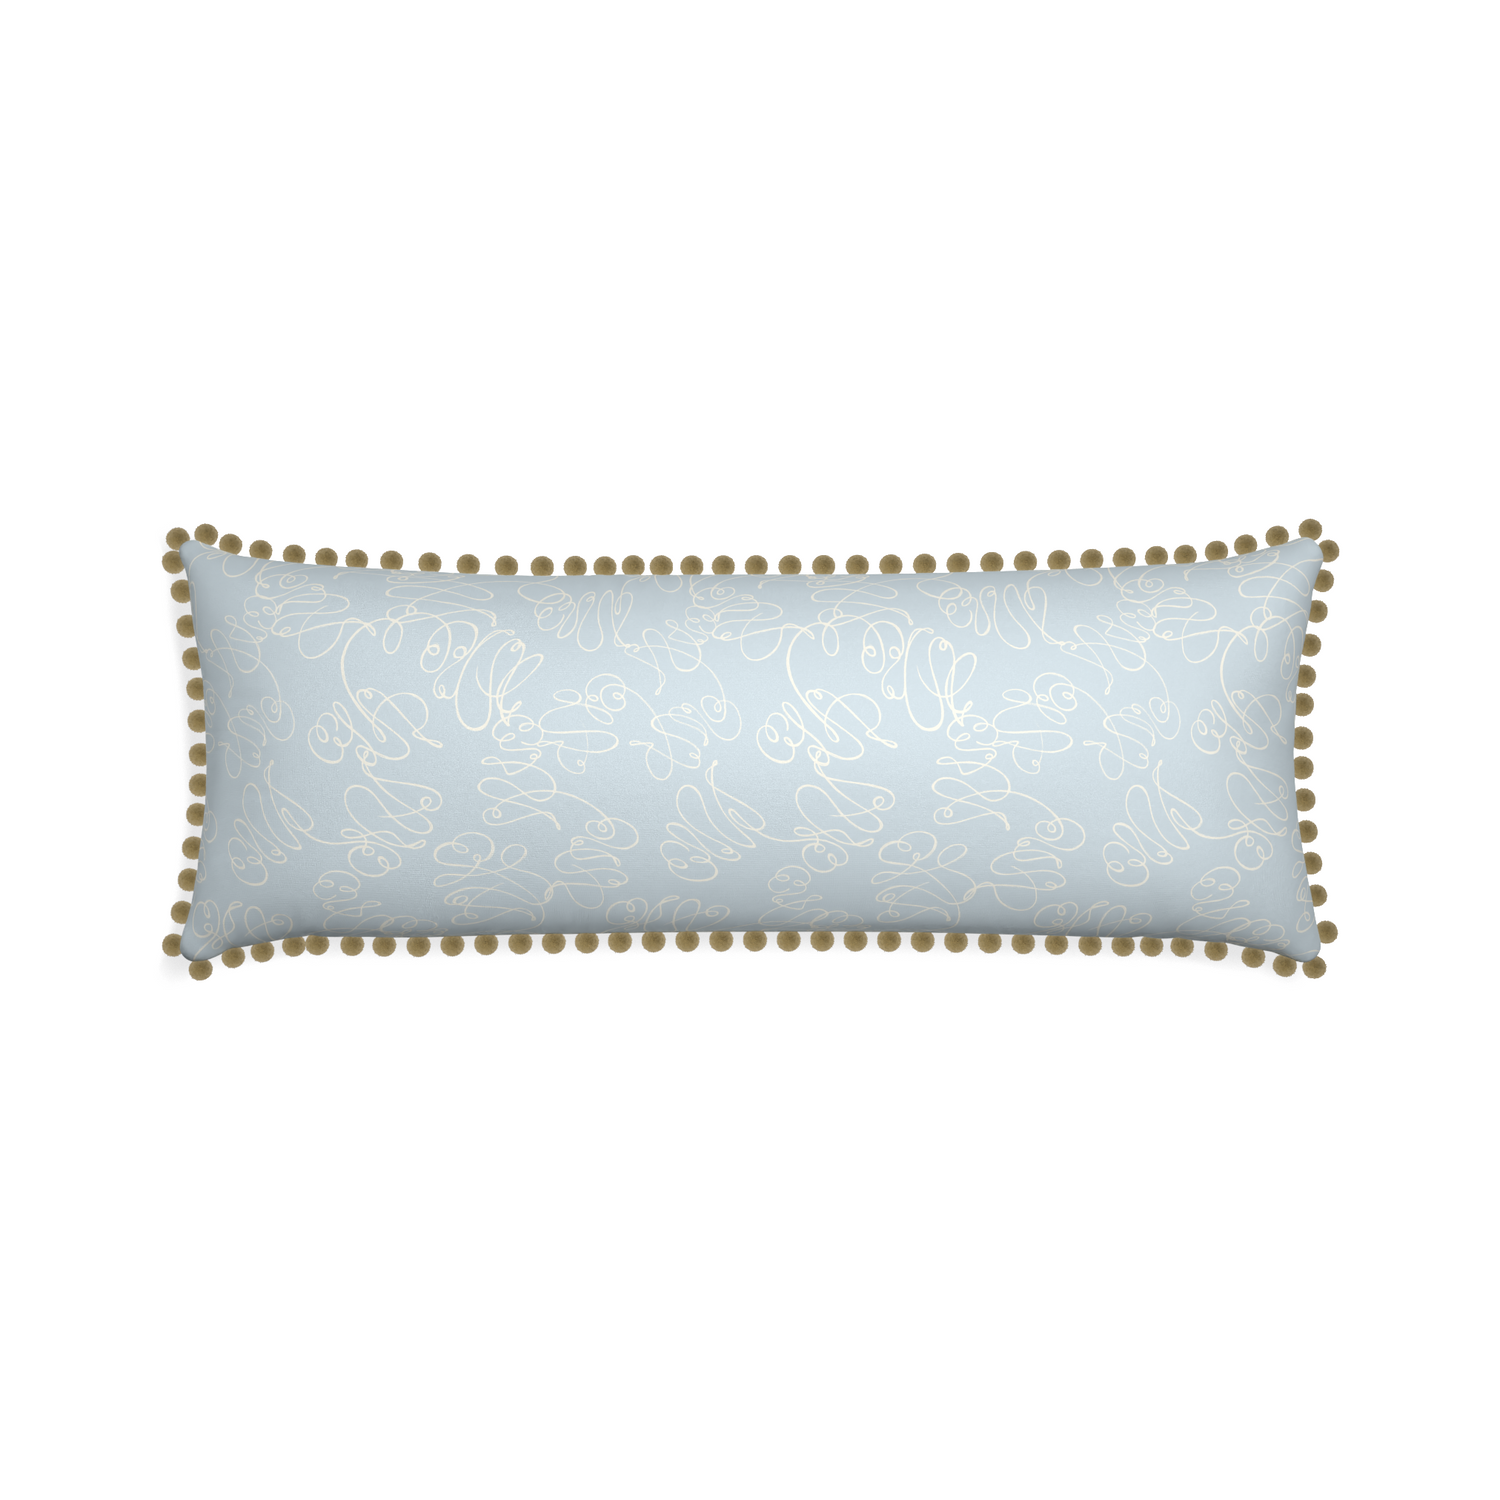 Xl-lumbar mirabella custom powder blue abstractpillow with olive pom pom on white background